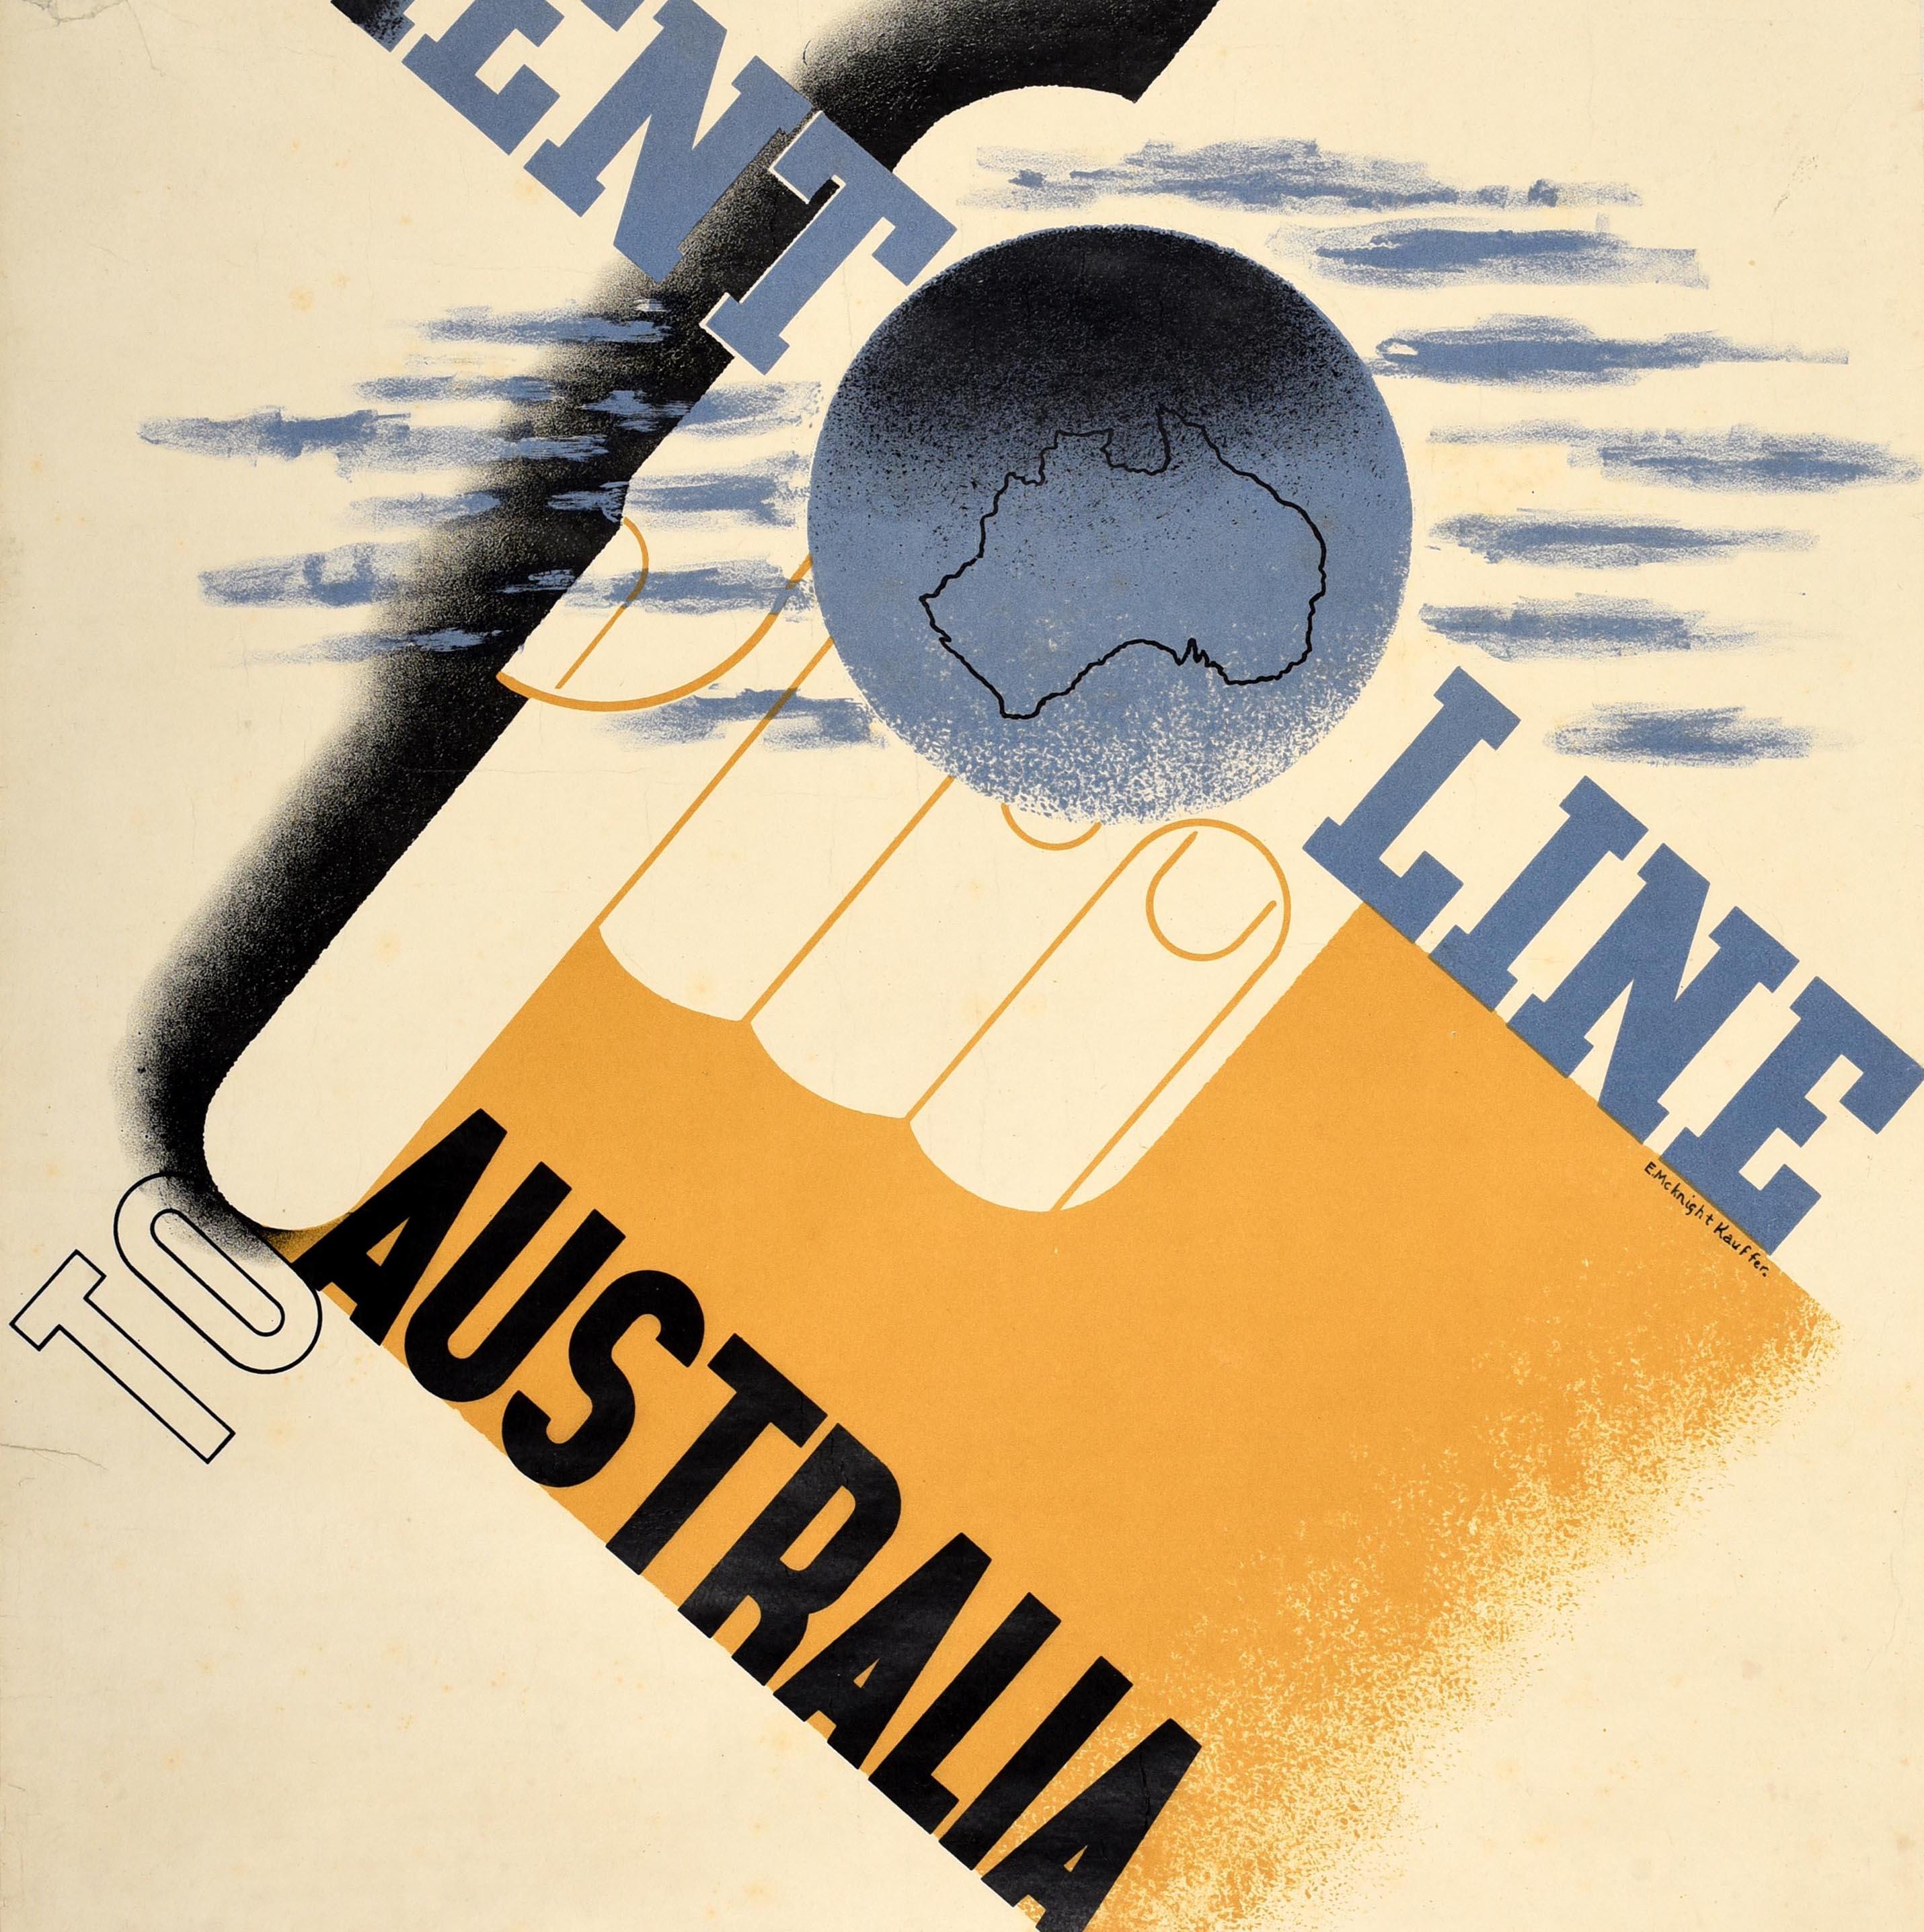 Original vintage travel poster - Orient Line to Australia - featuring a great design by one of the most renowned poster artists of the 20th century Edward McKnight Kauffer (1890-1954) depicting the title text running diagonally by a hand holding an